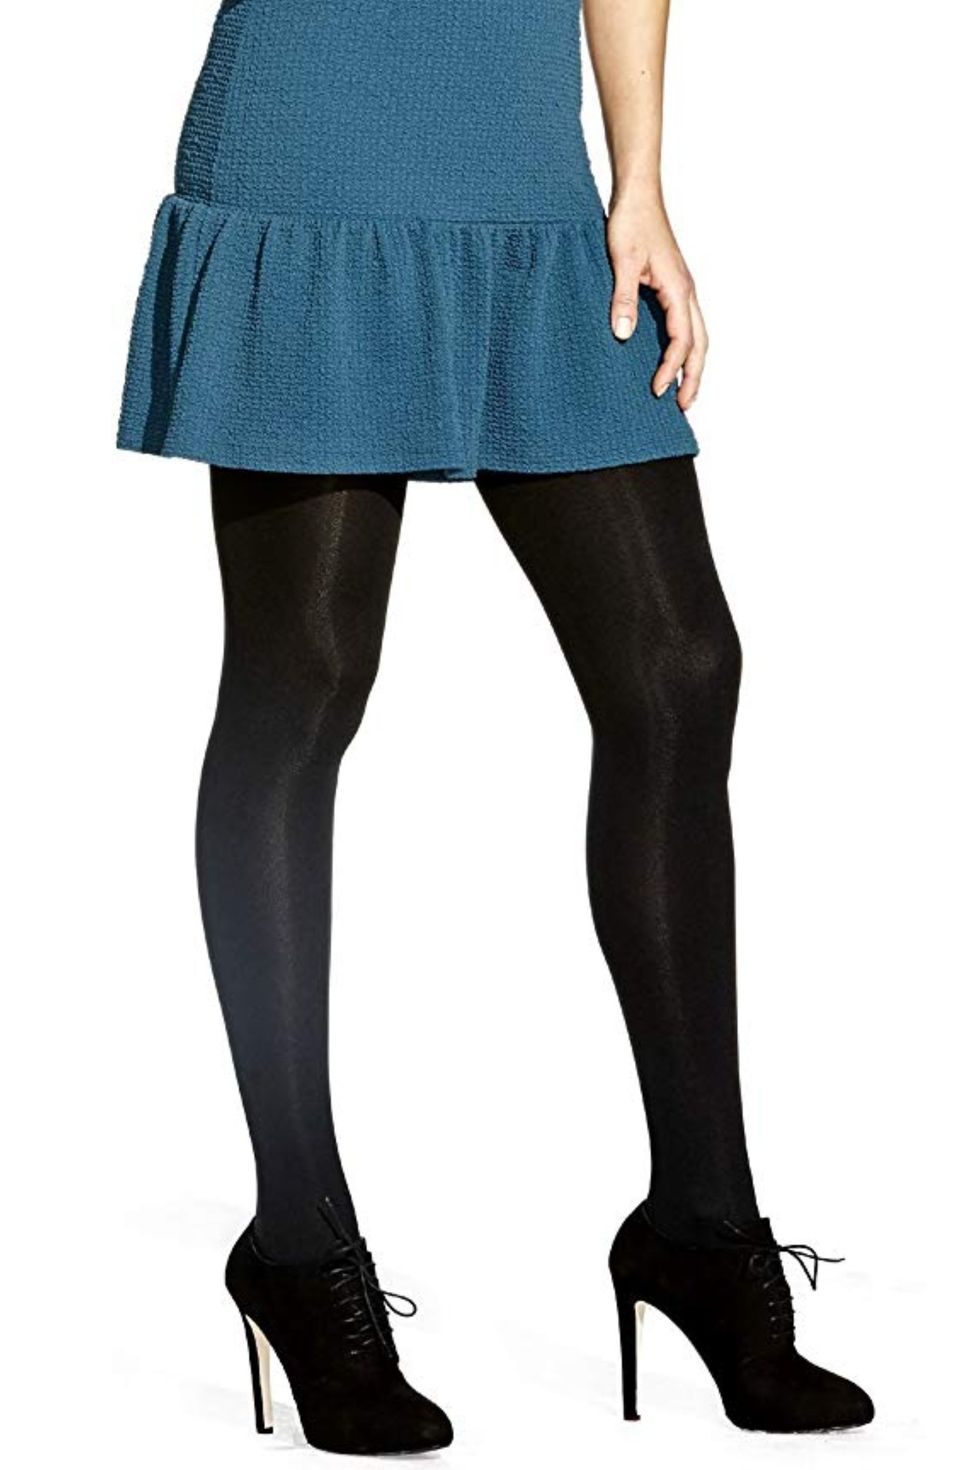 Berkshire Women's Cozy Tight with Fleece-Lined Leg, Navy, Tall : :  Clothing, Shoes & Accessories